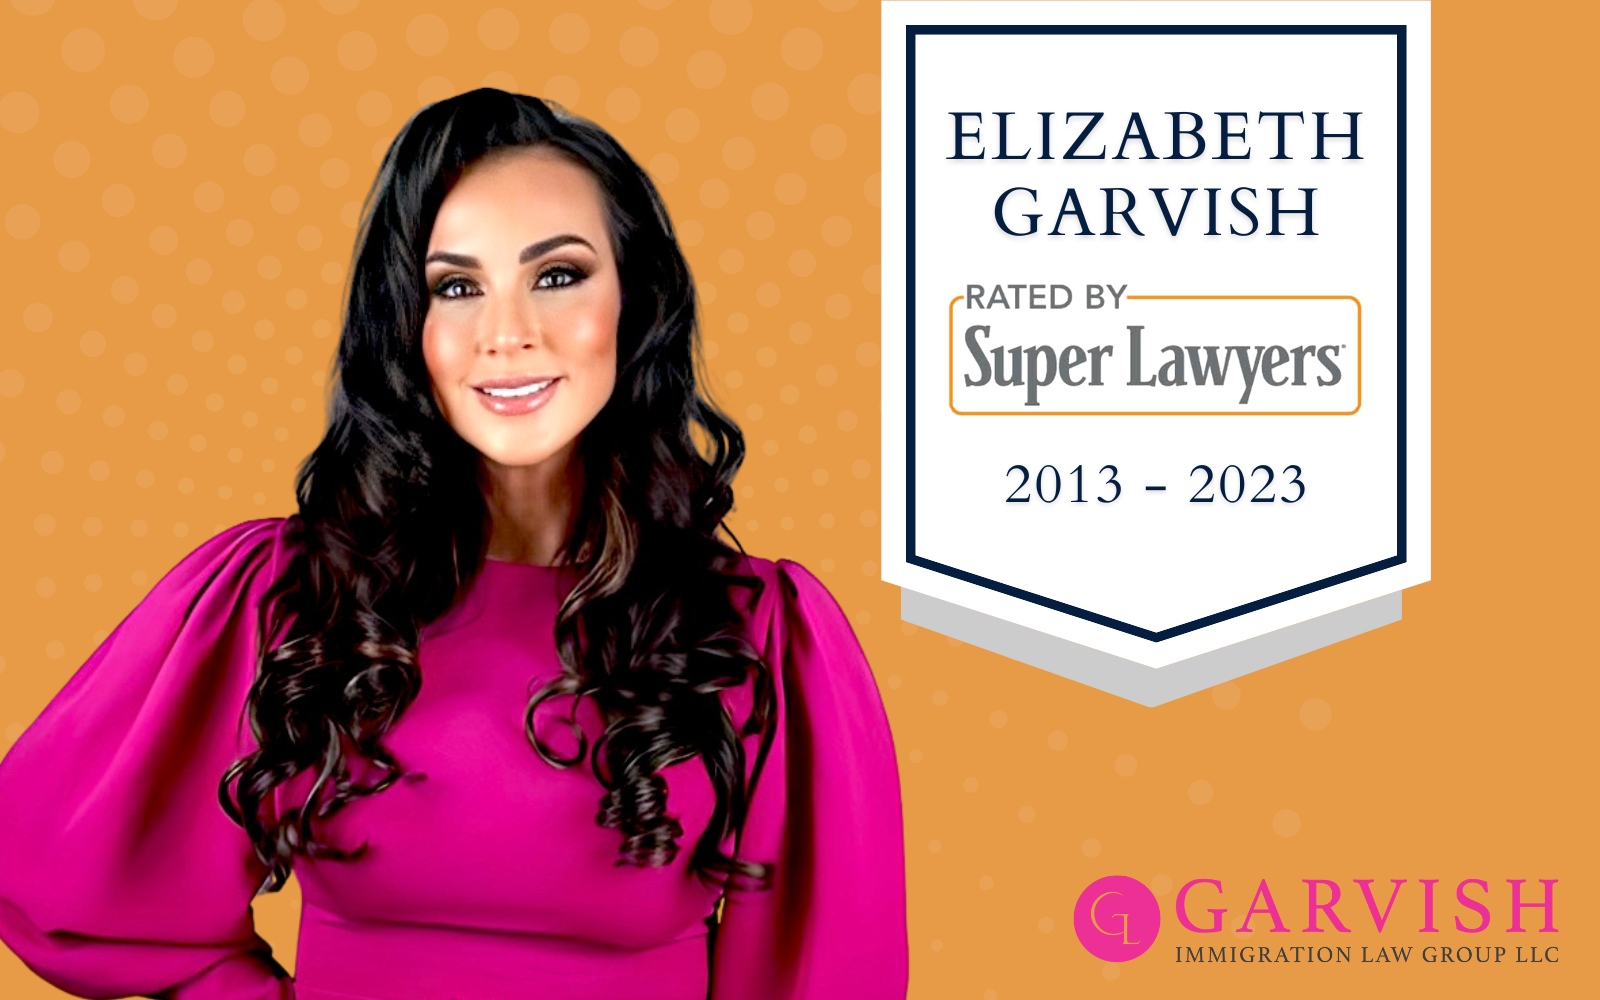 2023 Georgia Super Lawyers Blog Header with Yellow Background and Banner for Elizabeth Garvish, Atlanta Immigration Attorney, Founder of Garvish Immigration Law Group